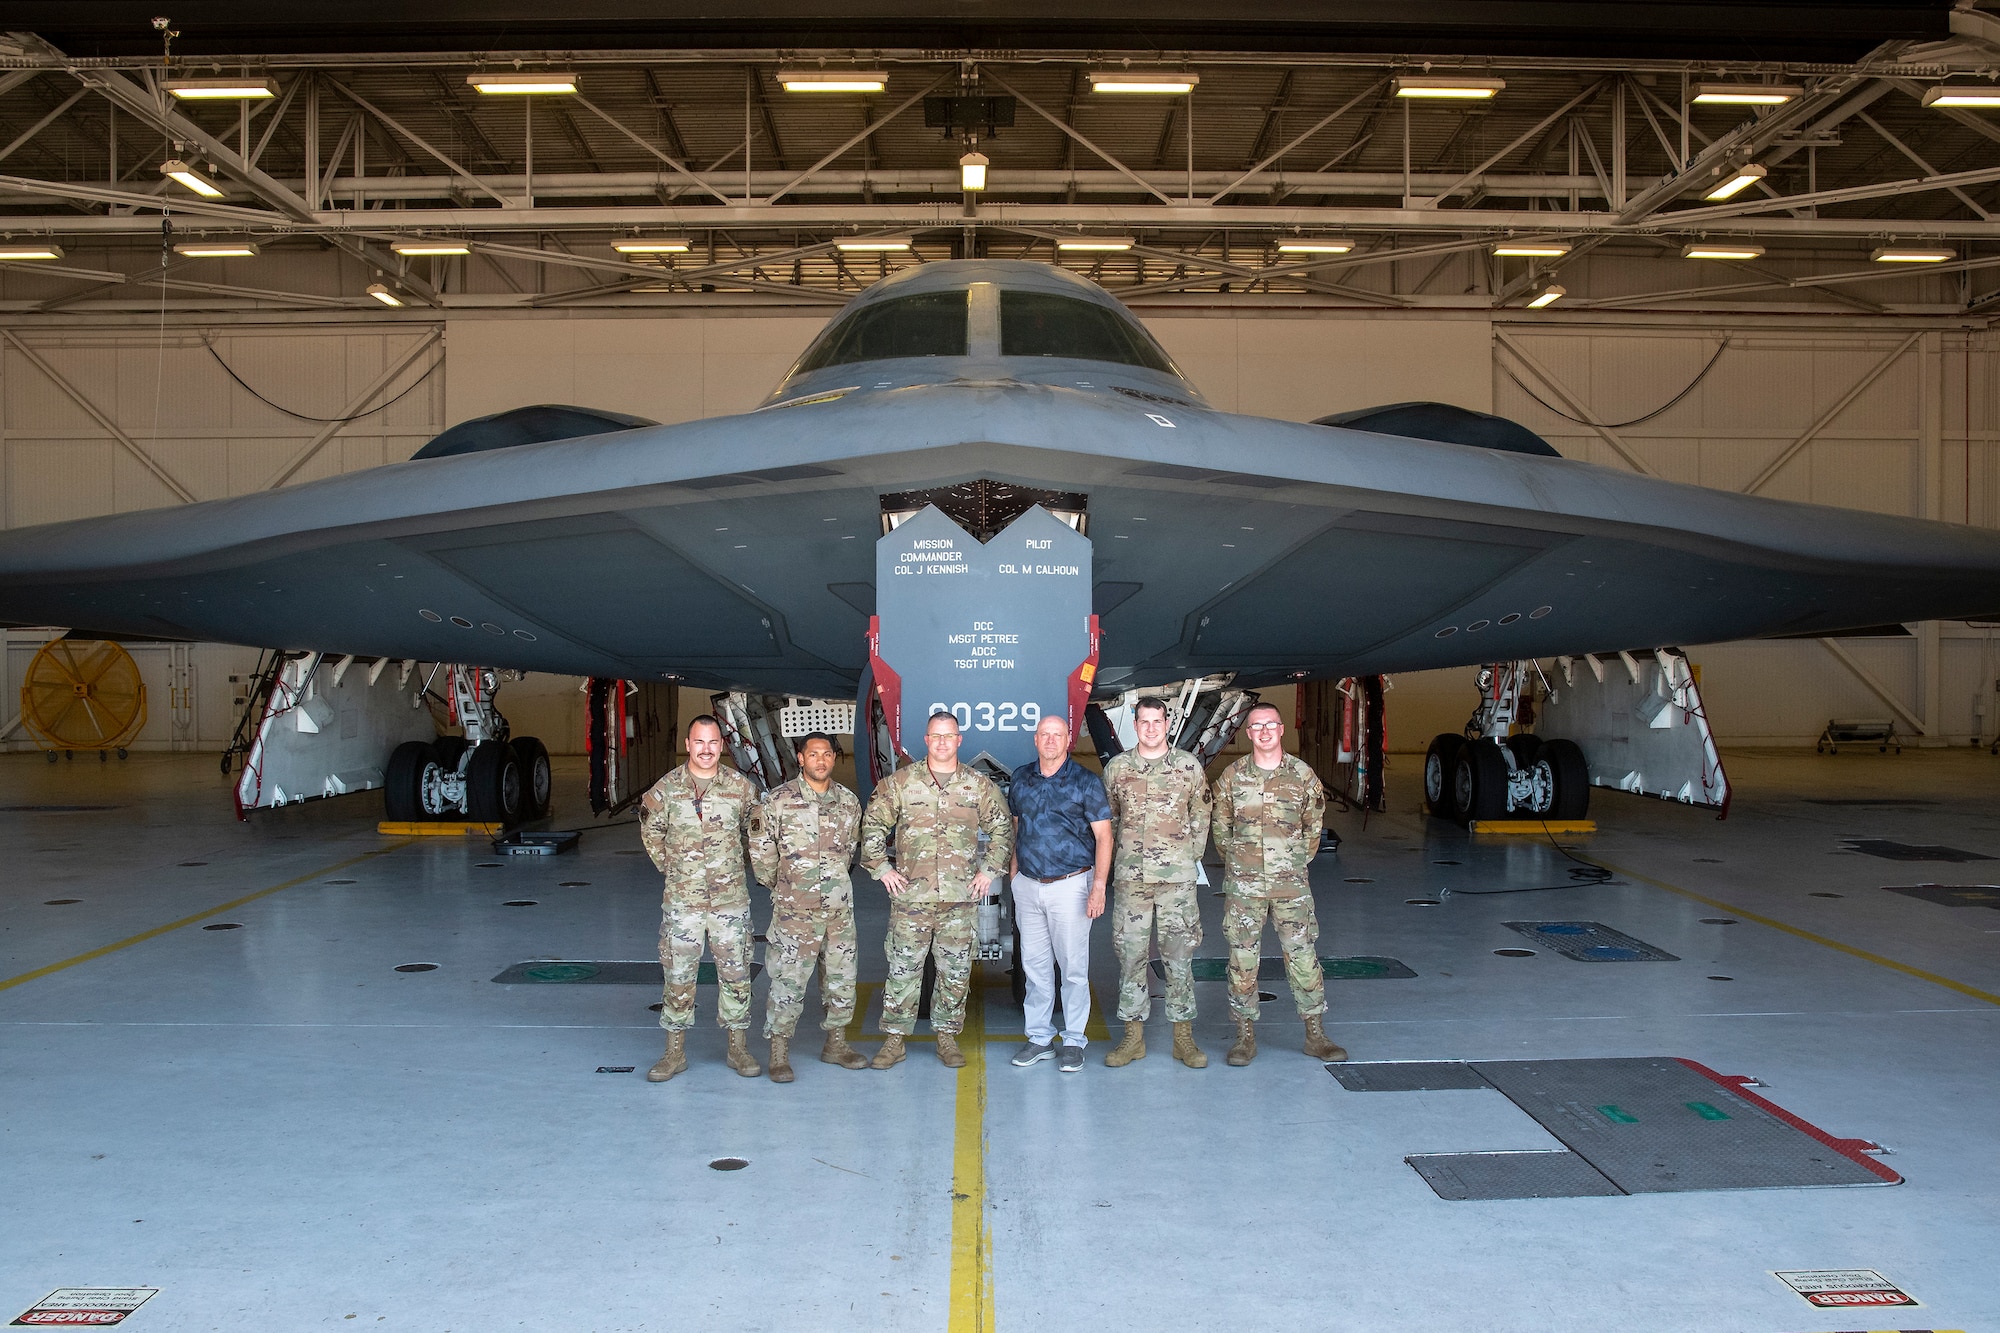 Former U.S. Air Force Master Sgt. Kieth Meadows poses for a photo with 131st Bomb Wing crew chiefs during a visit to Whiteman Air Force Base, Missouri, Aug. 10, 2022. Meadows was the first dedicated crew chief for B-2 Spirit stealth bomber number 80-329, the Spirit of Missouri, from 1991-1996, and met with the aircraft’s current maintenance team during his visit. (U.S. Air National Guard photo by Master Sgt. John Hillier)